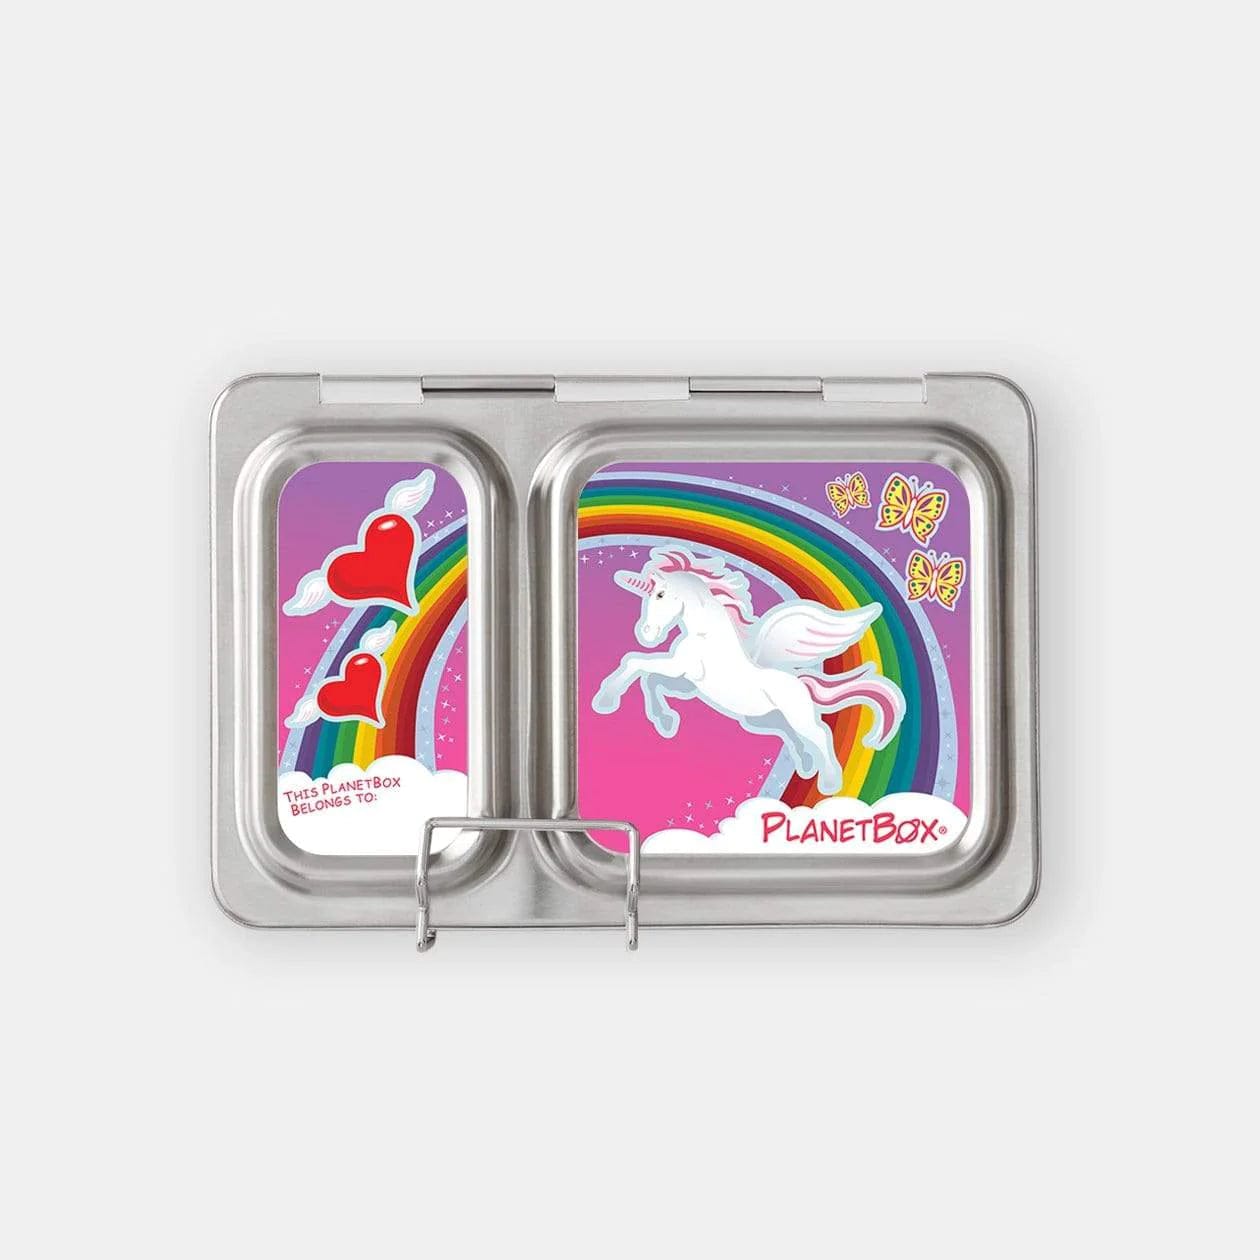 Planetbox SHUTTLE Lunch Box Kits (Box, Carry Bag, Container, Magnets) Expandable - Black / Rainbow Unicorn